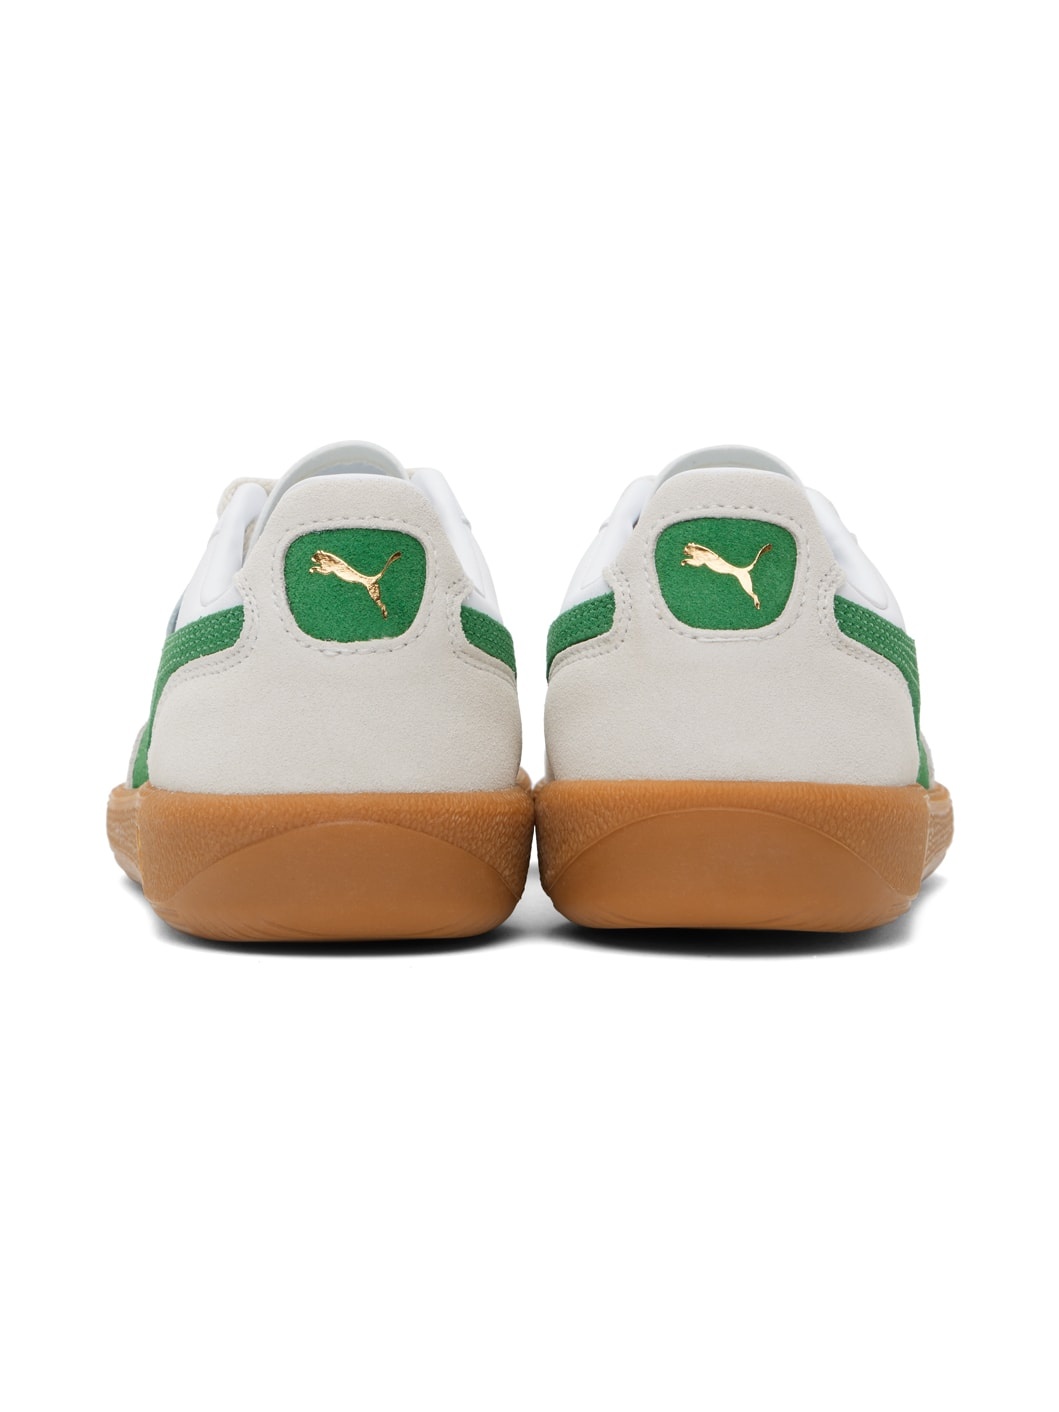 Off-White & Green Palermo Leather Sneakers - 2